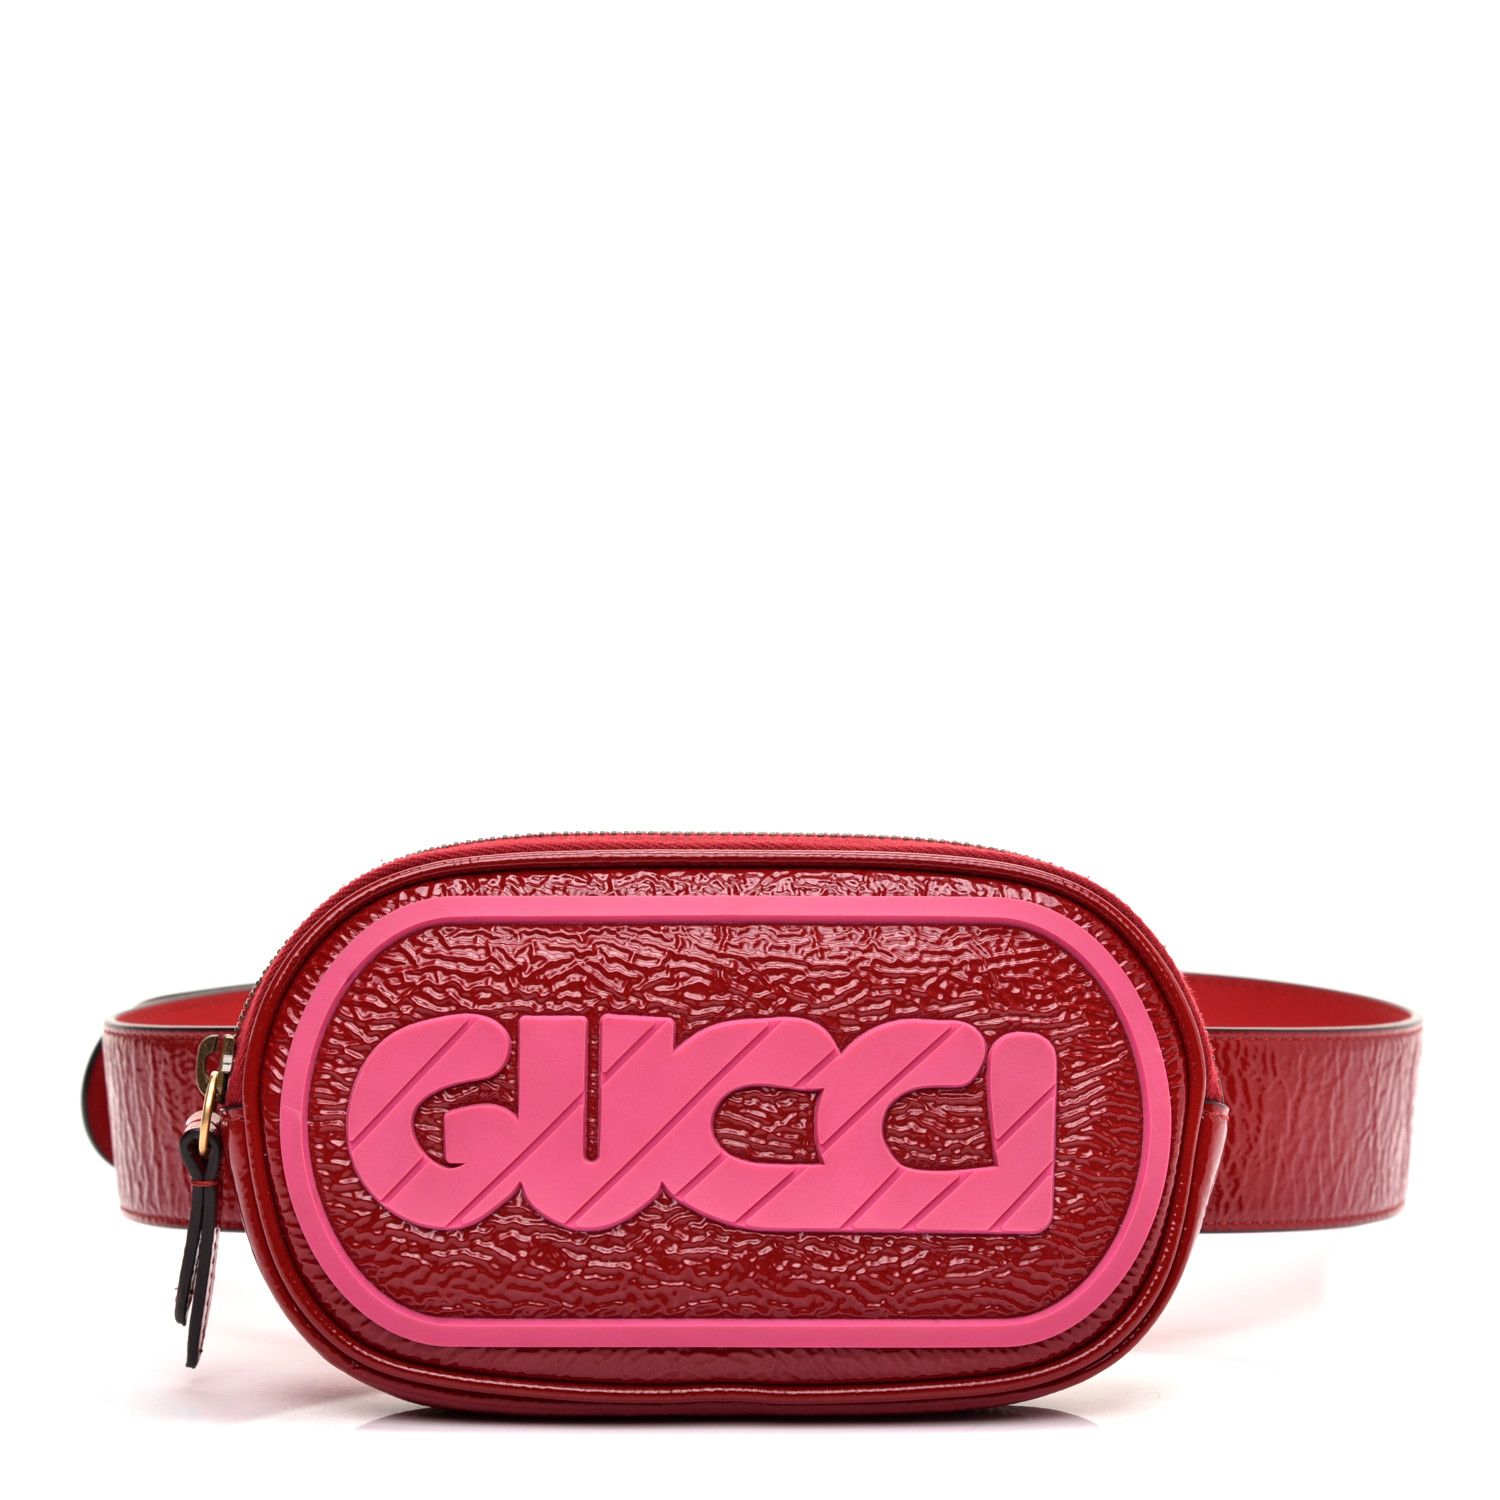 Patent Rubber Logo Belt Bag 75 30 Hibiscus Red | Fashionphile